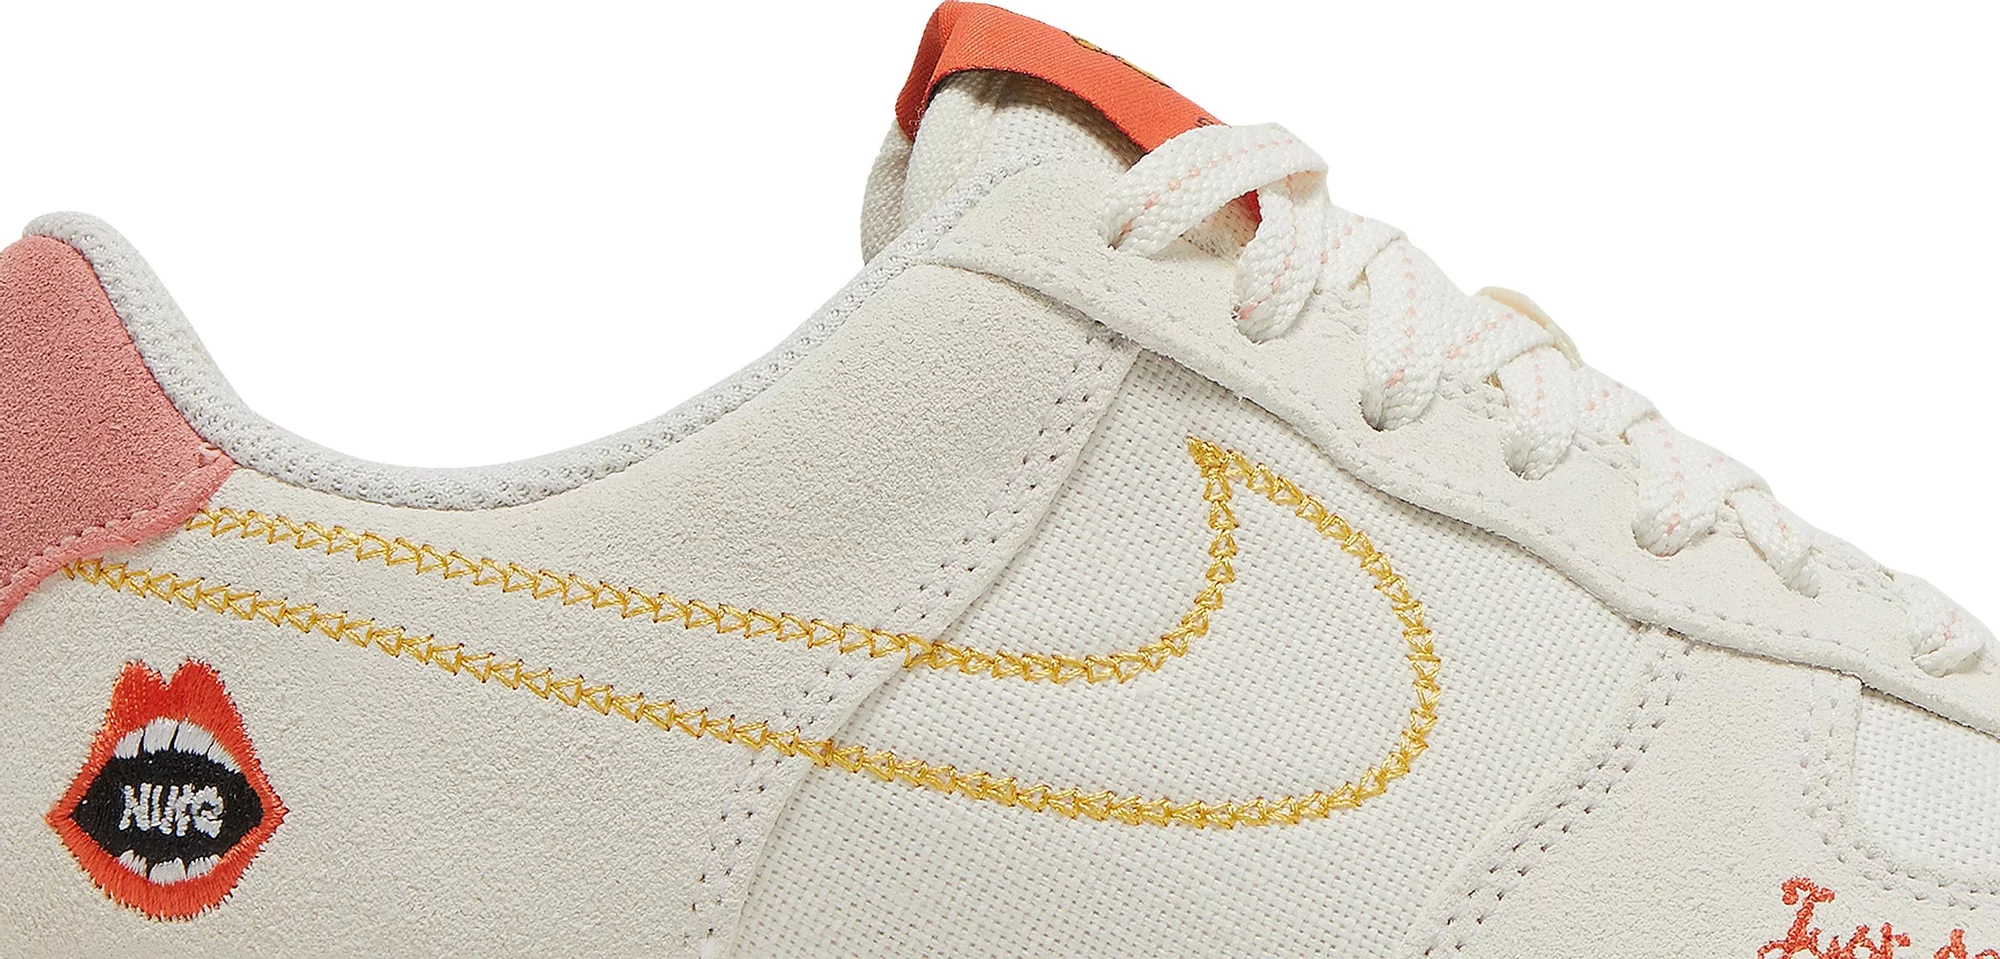 Summer 2022 Style Guide: Nike Air Force 1s